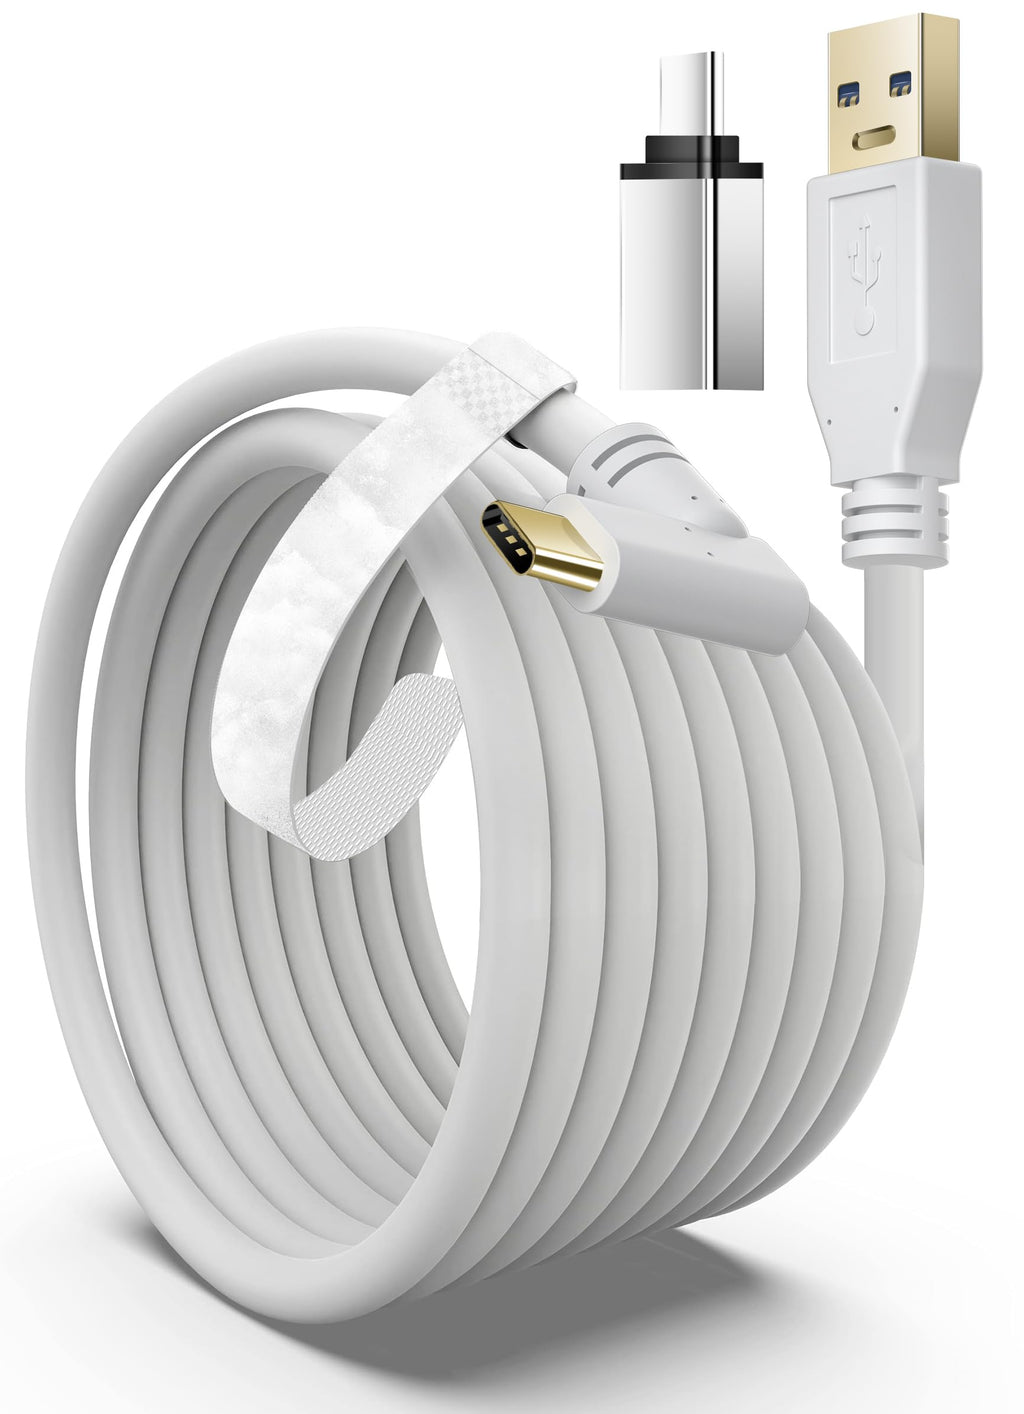  [AUSTRALIA] - AICaes VR Cable 19.6 FT for Oculus Quest 3/2/1/Pico 4 Accessories/Rift S/PC/Steam VR,VR Headset Cable Link Cable 2 in 1 USB 3.0 Type C to C High Speed Data Transfer Charging Cord for Gaming PC